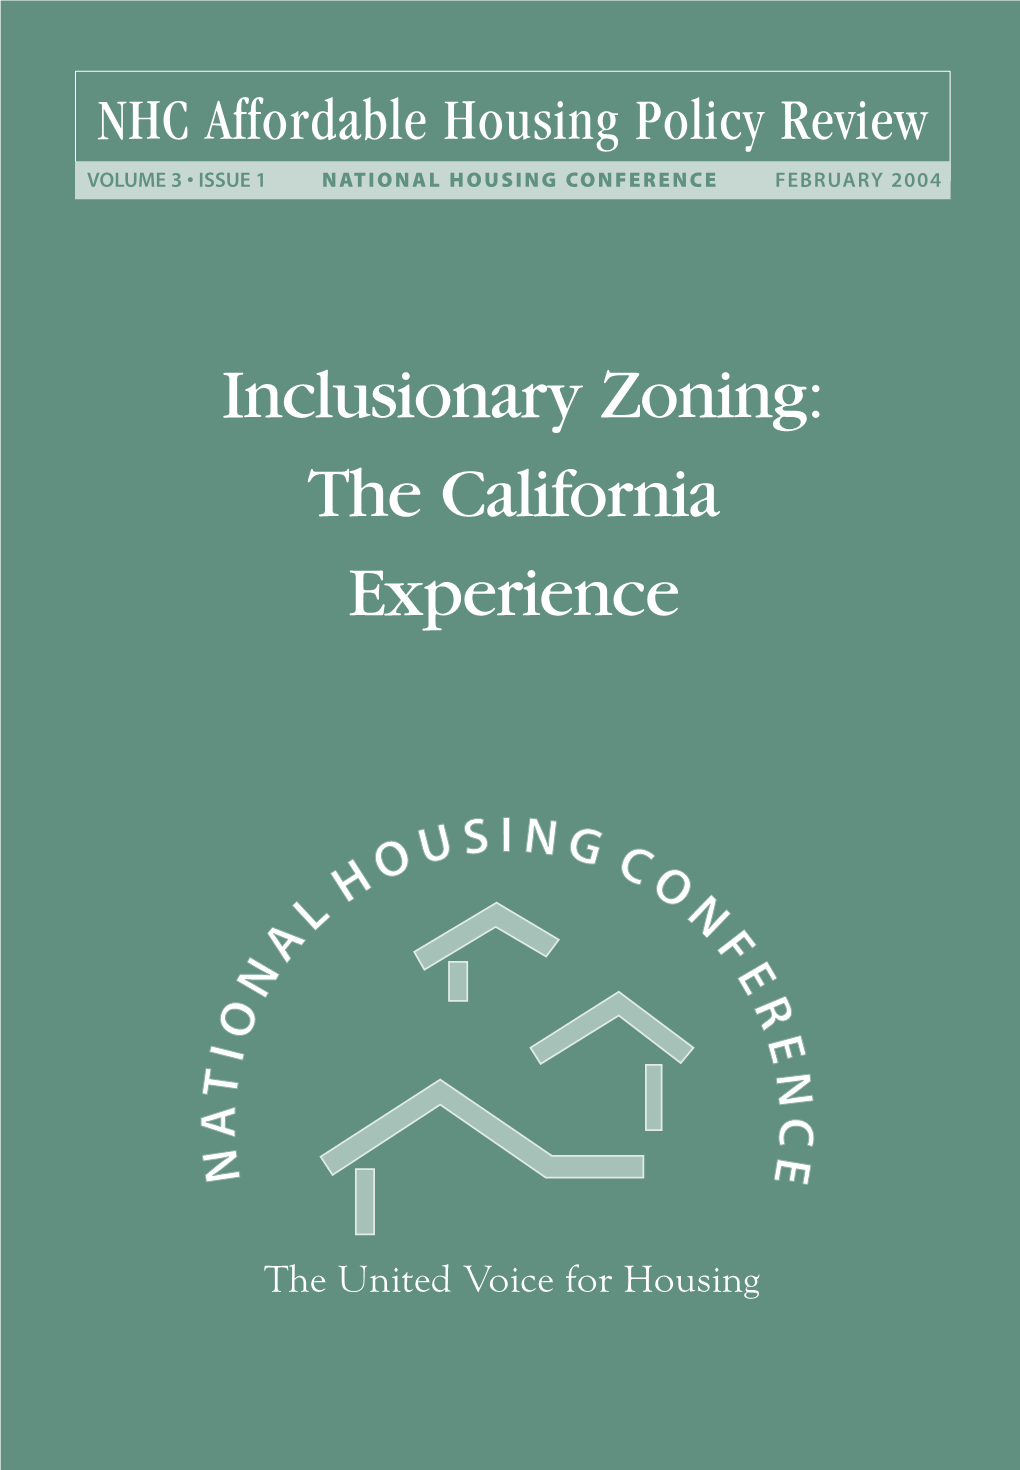 Inclusionary Zoning: the California Experience